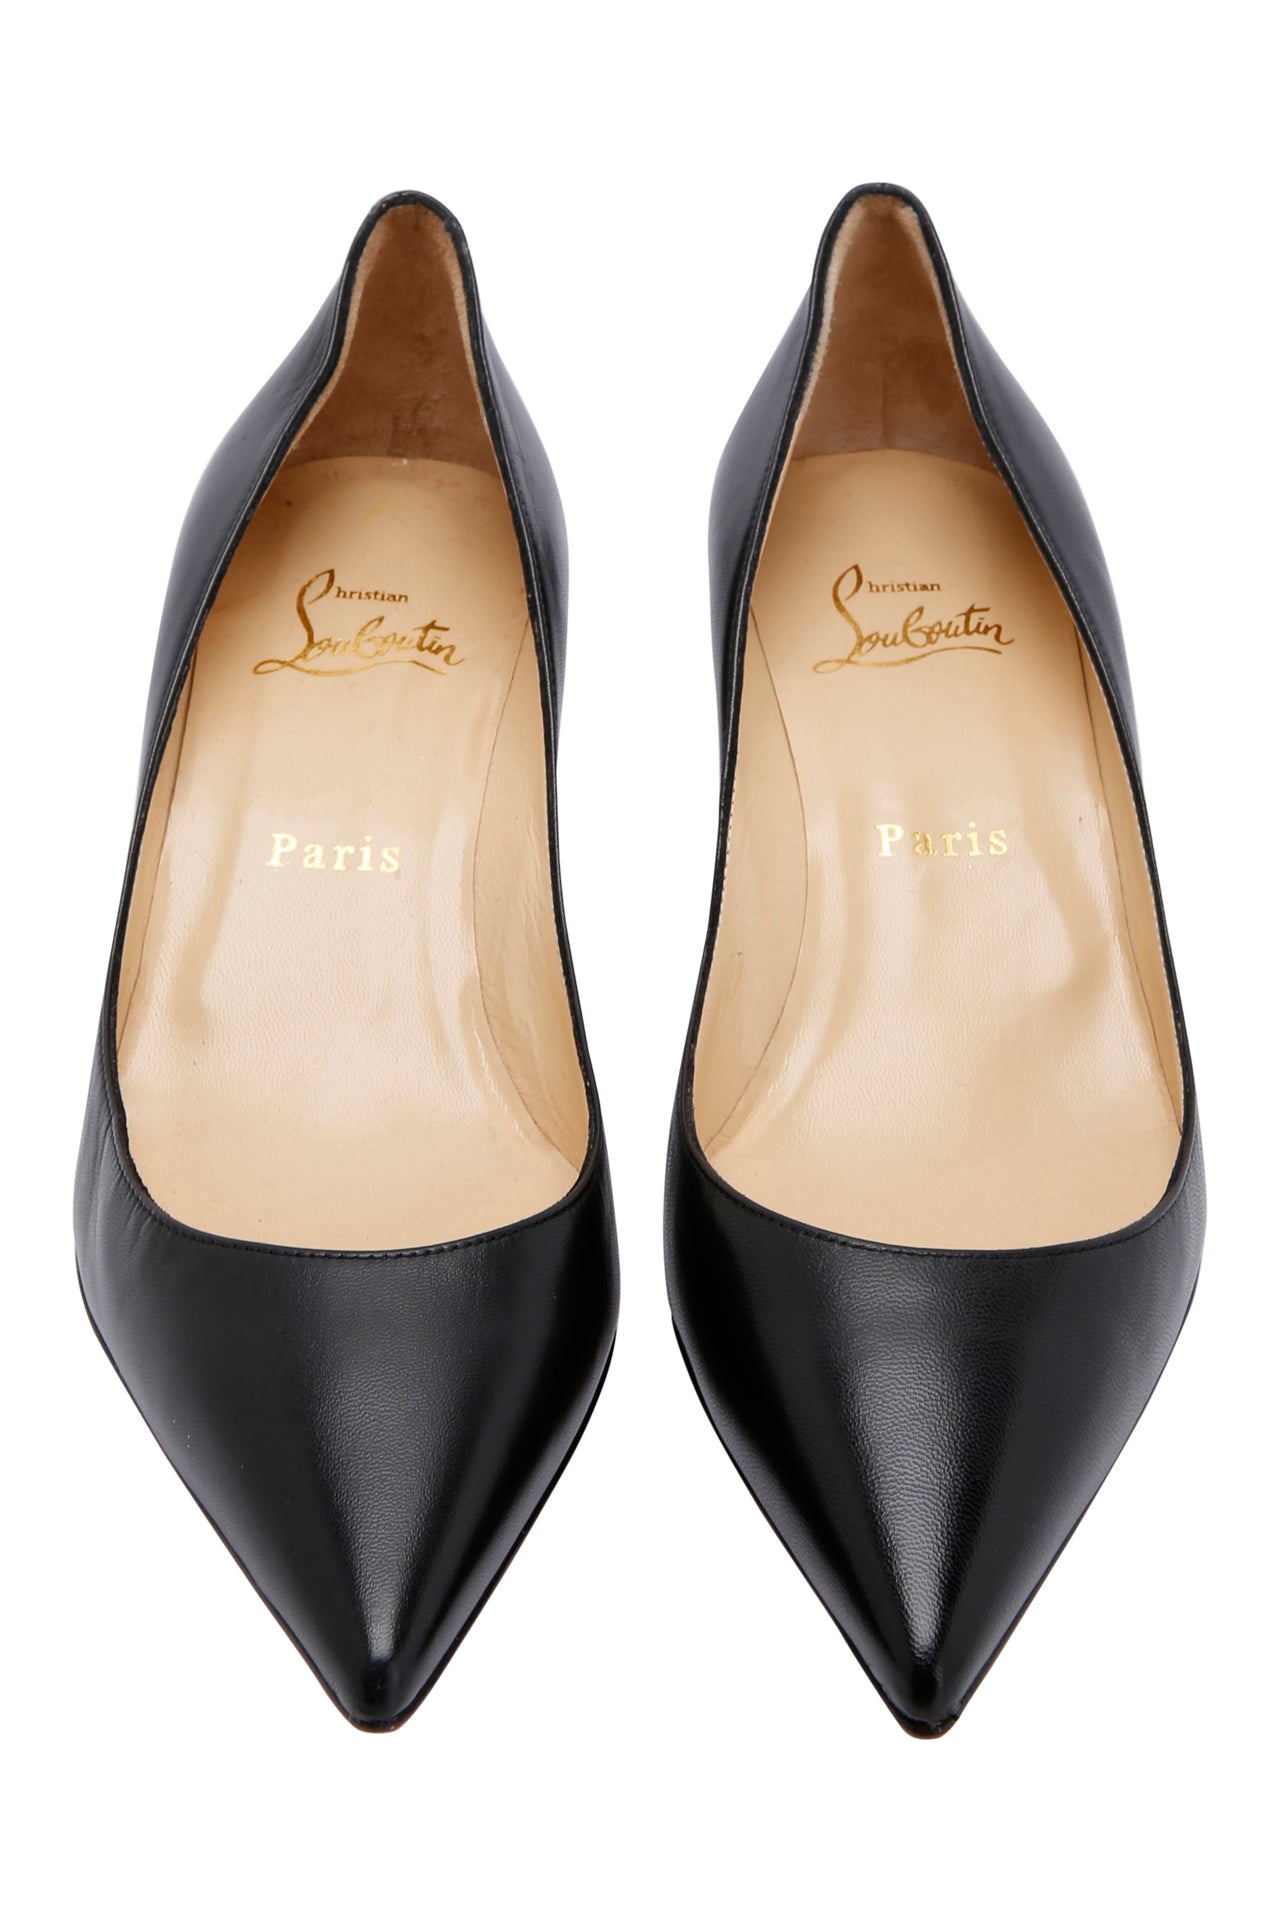 Christian Louboutin Black Patent Leather Pigalle Pointed Toe Pumps Size EU 38.5